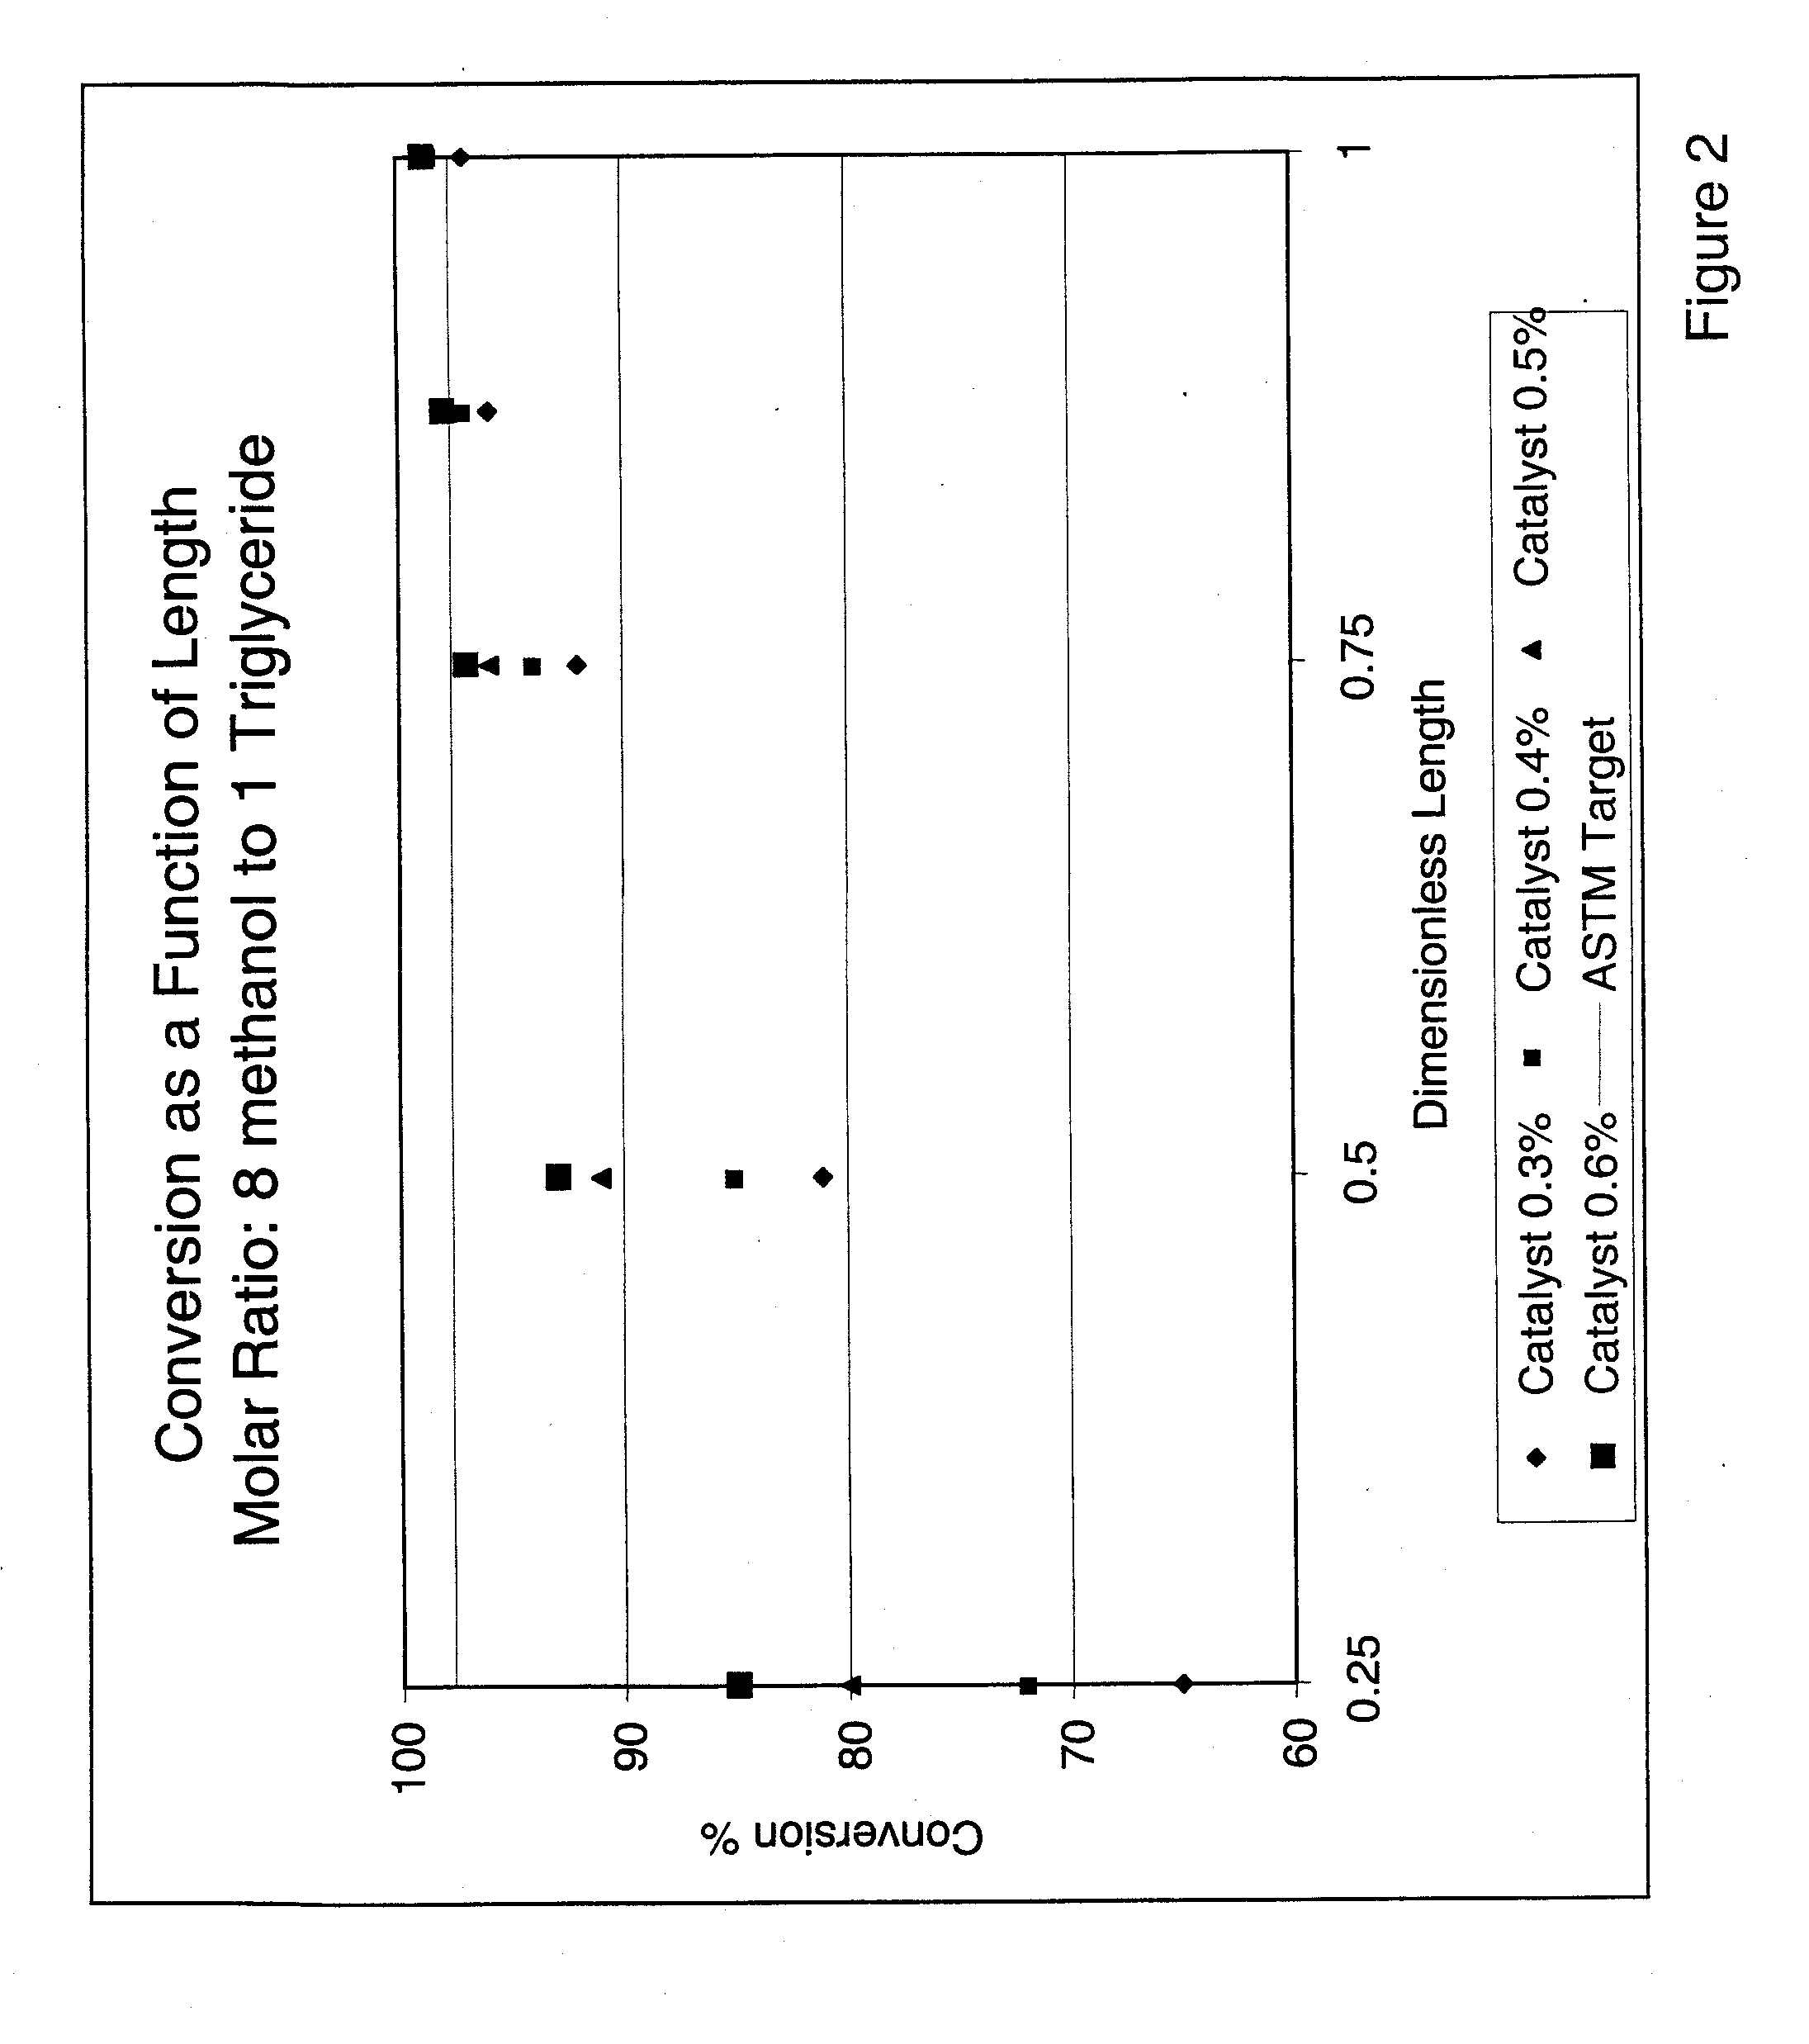 Apparatus and method for continuous production of biodiesel fuel